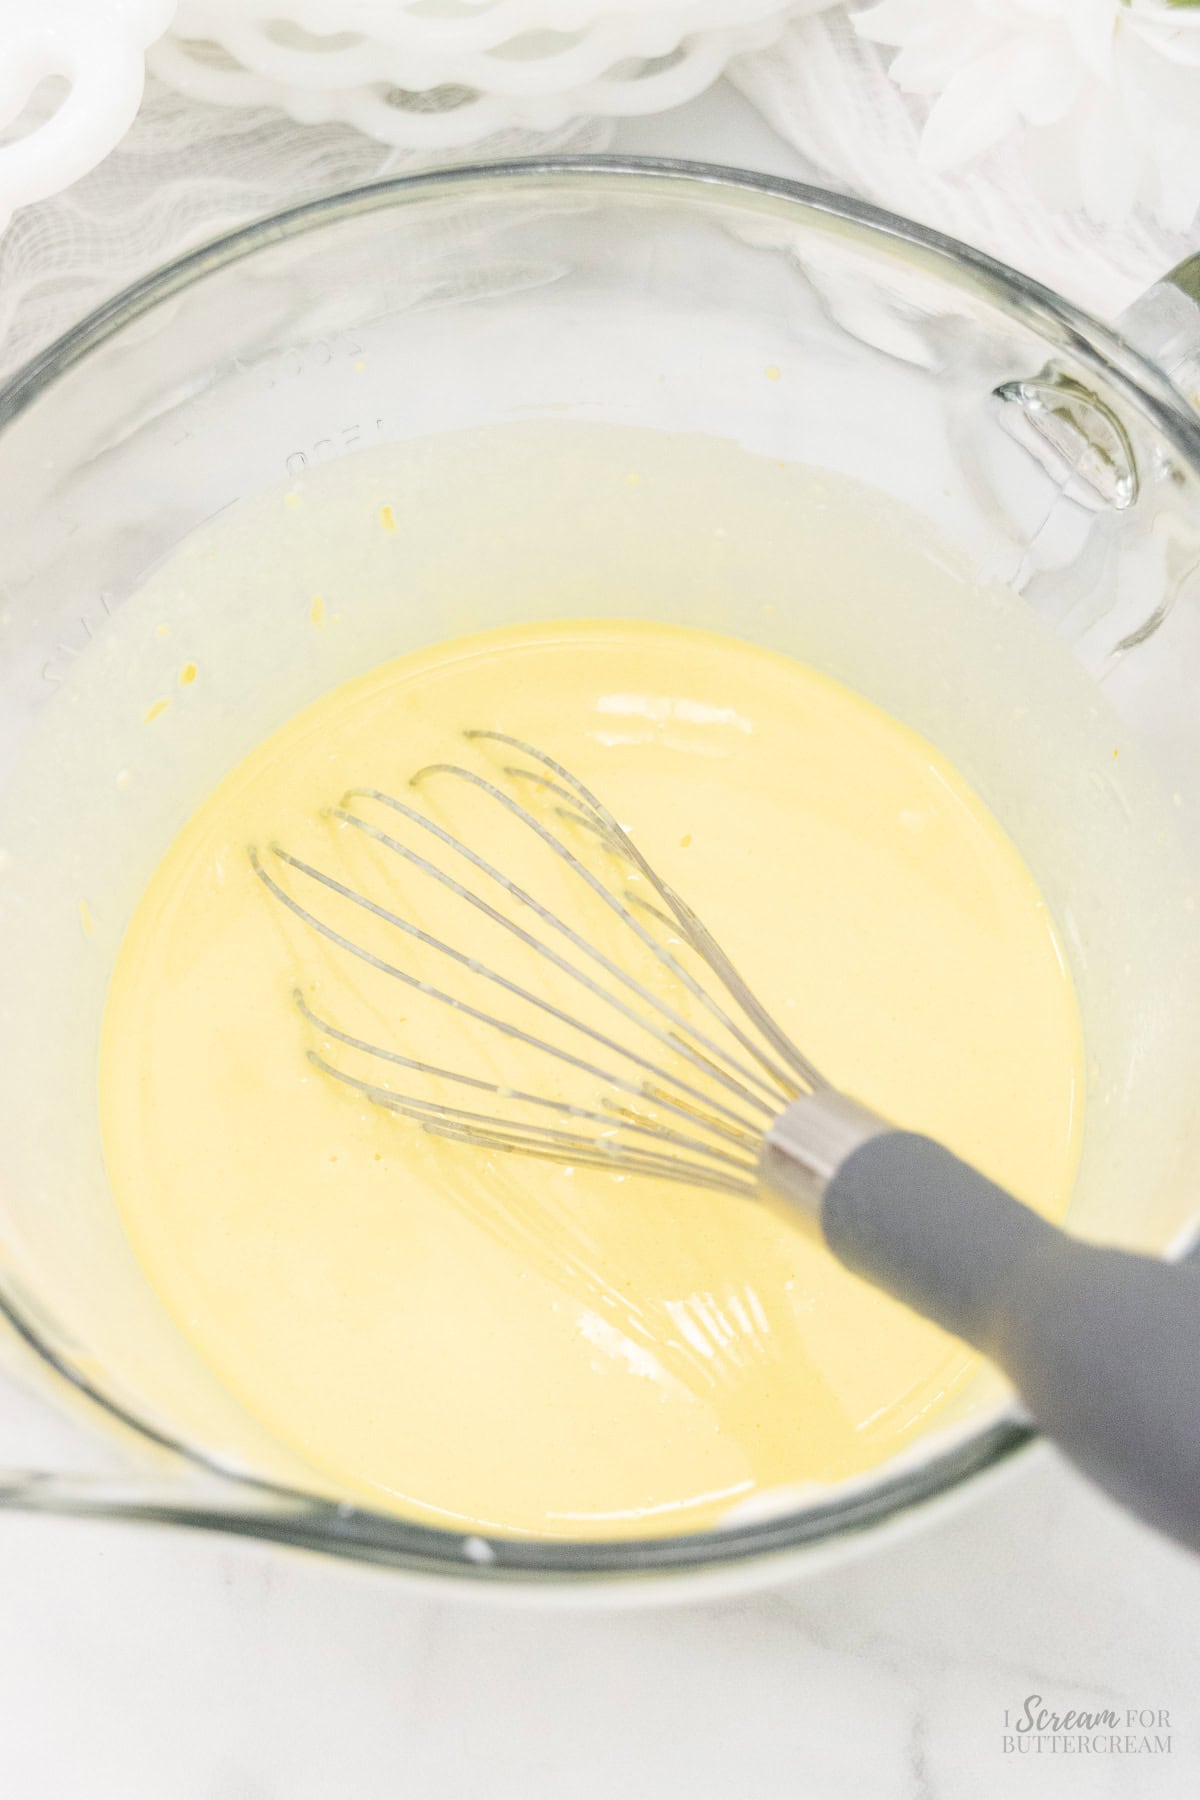 Liquid cake ingredients in a glass bowl with a whisk.